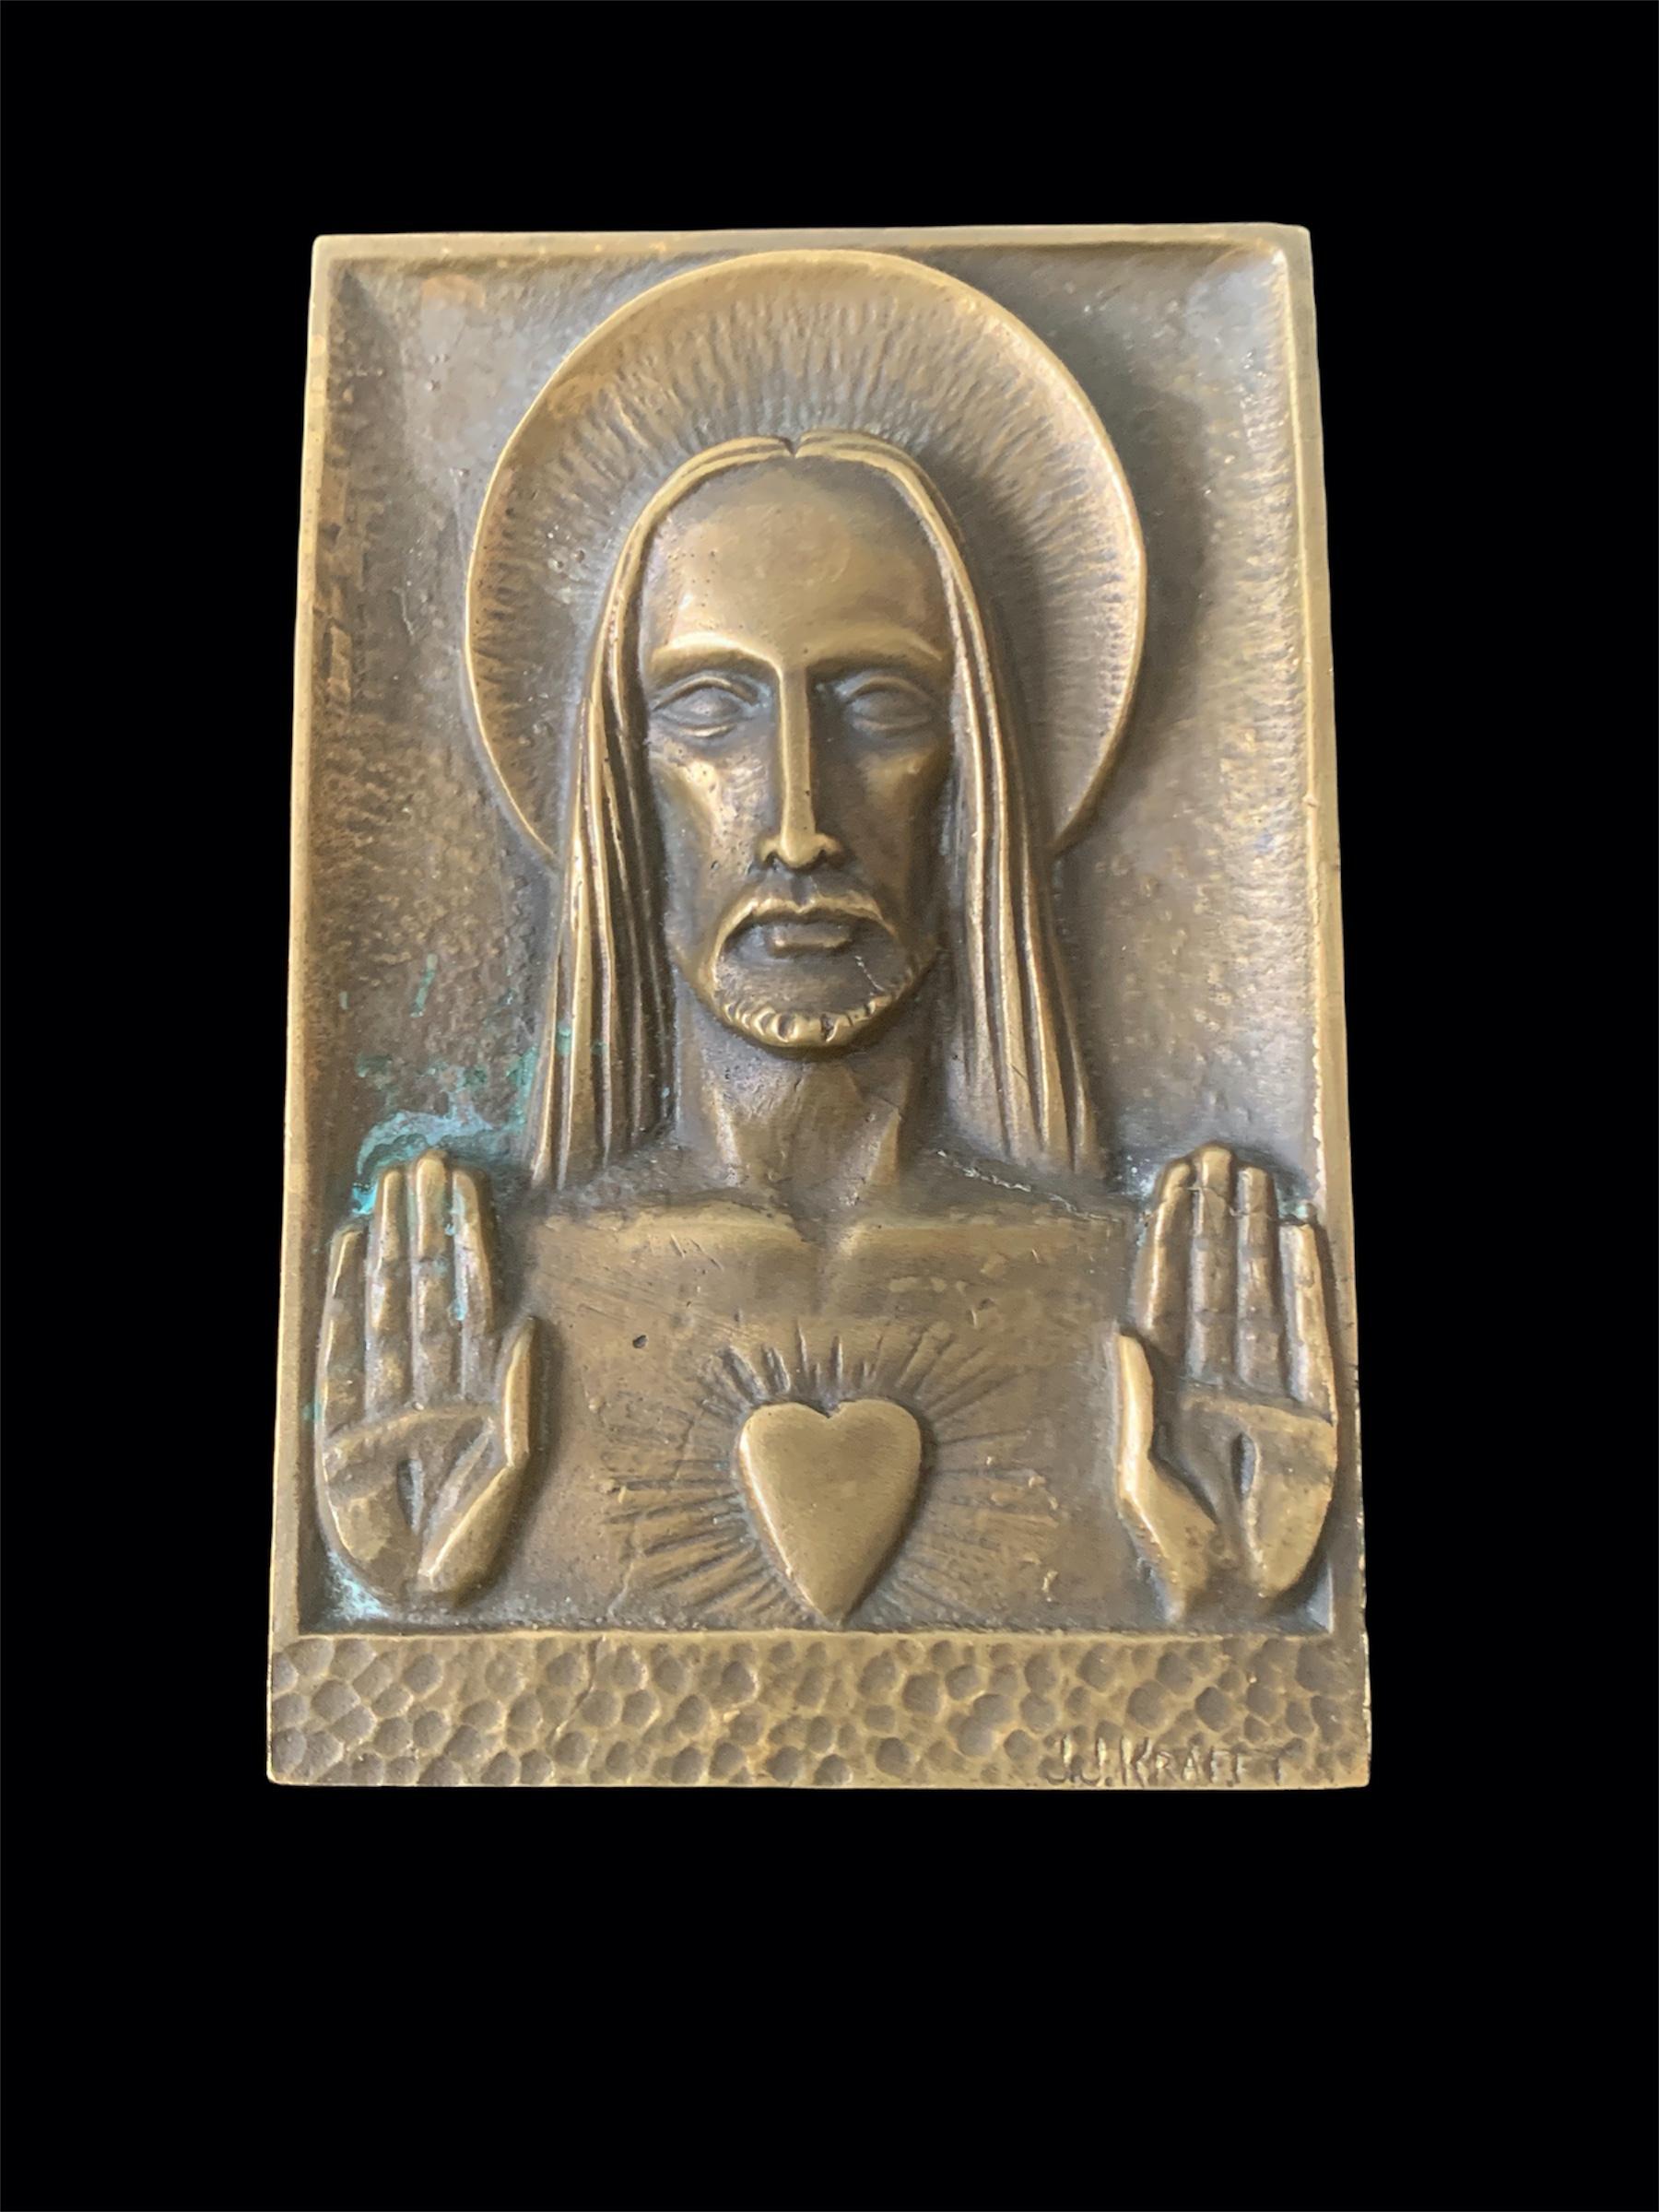 Bronze Plaque by French Designer
Jeans- jacques Kraftt
depicting Jesus
Signed by Artist 
Eloquent
small piece of bronze art to be displayed on a wall.